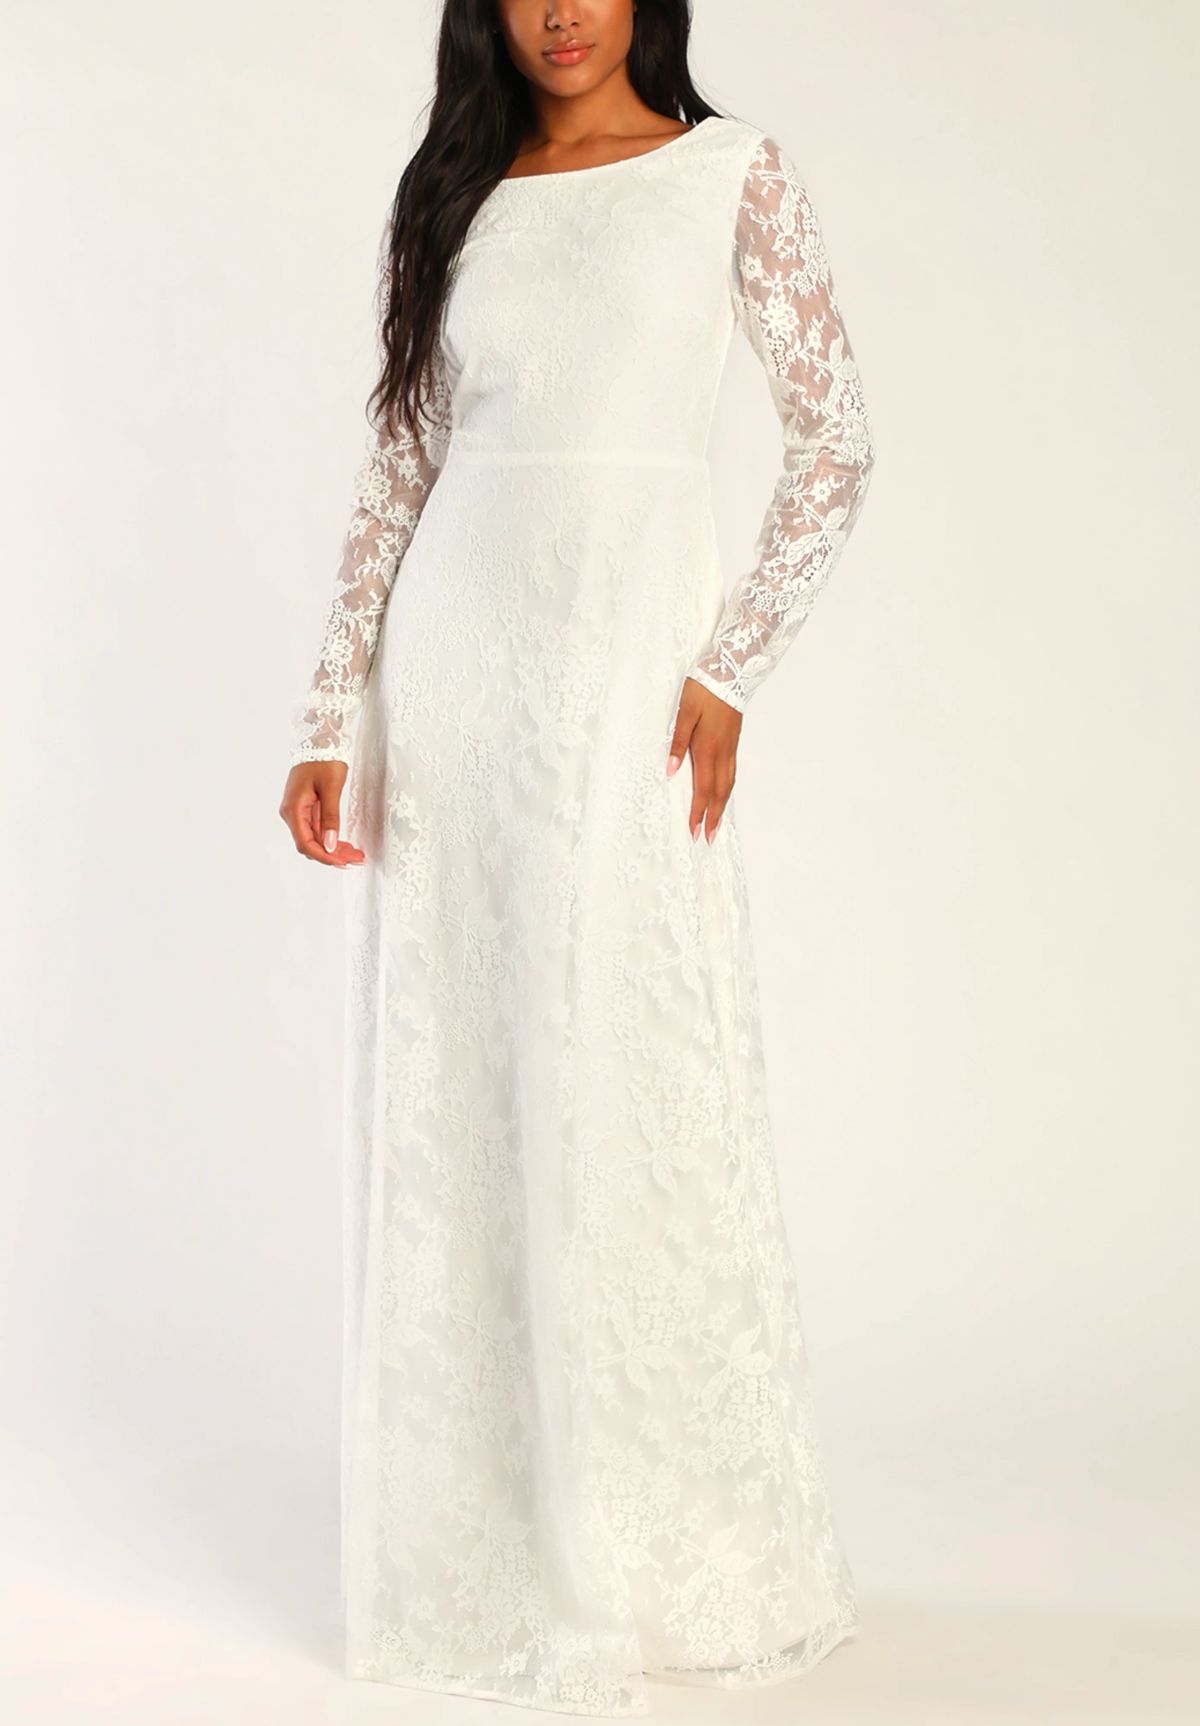 Blissful Romantic White Lace Backless Long Sleeve Maxi Dress